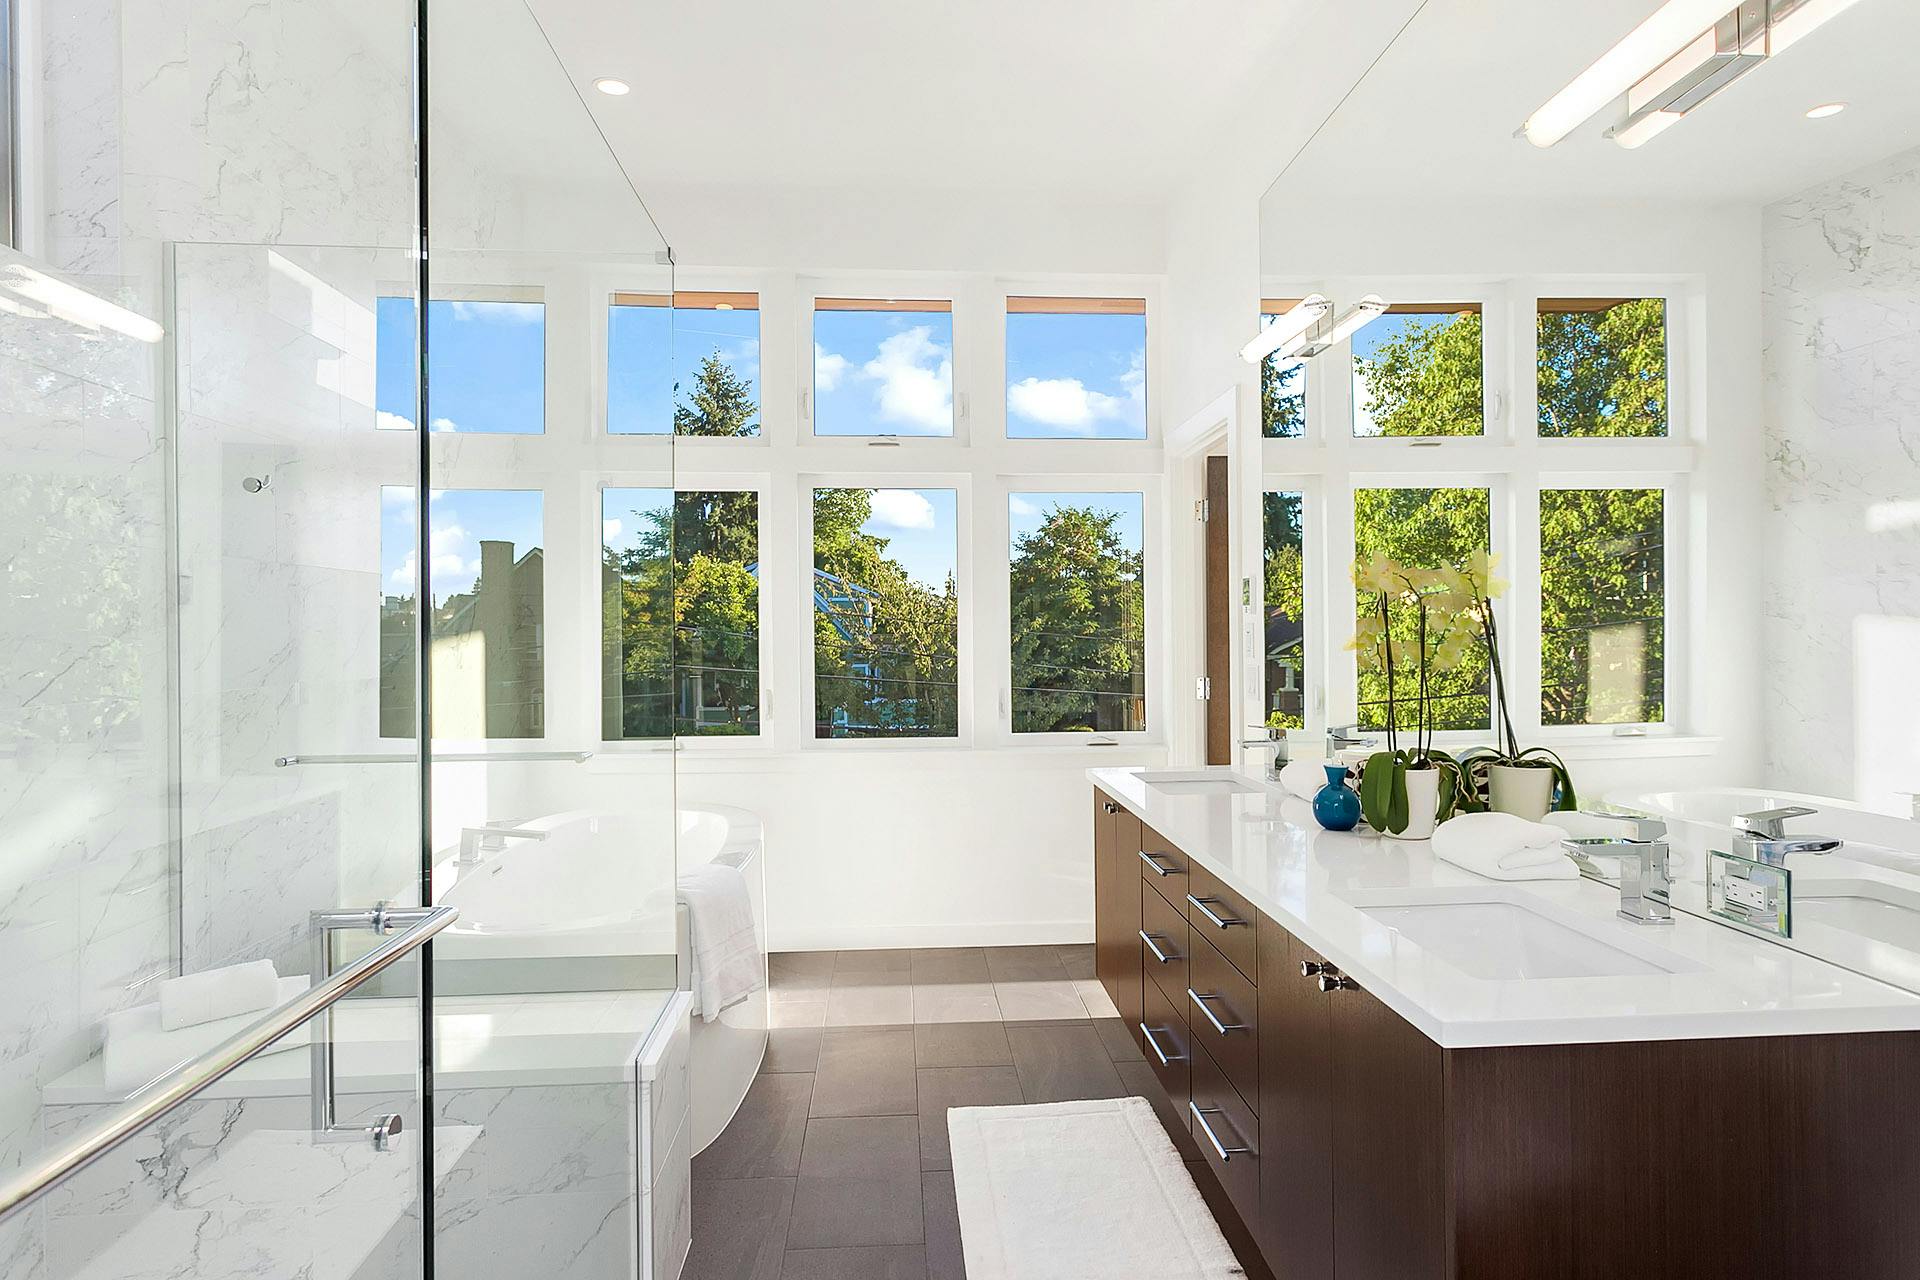 How to Photograph Bathrooms for Real Estate